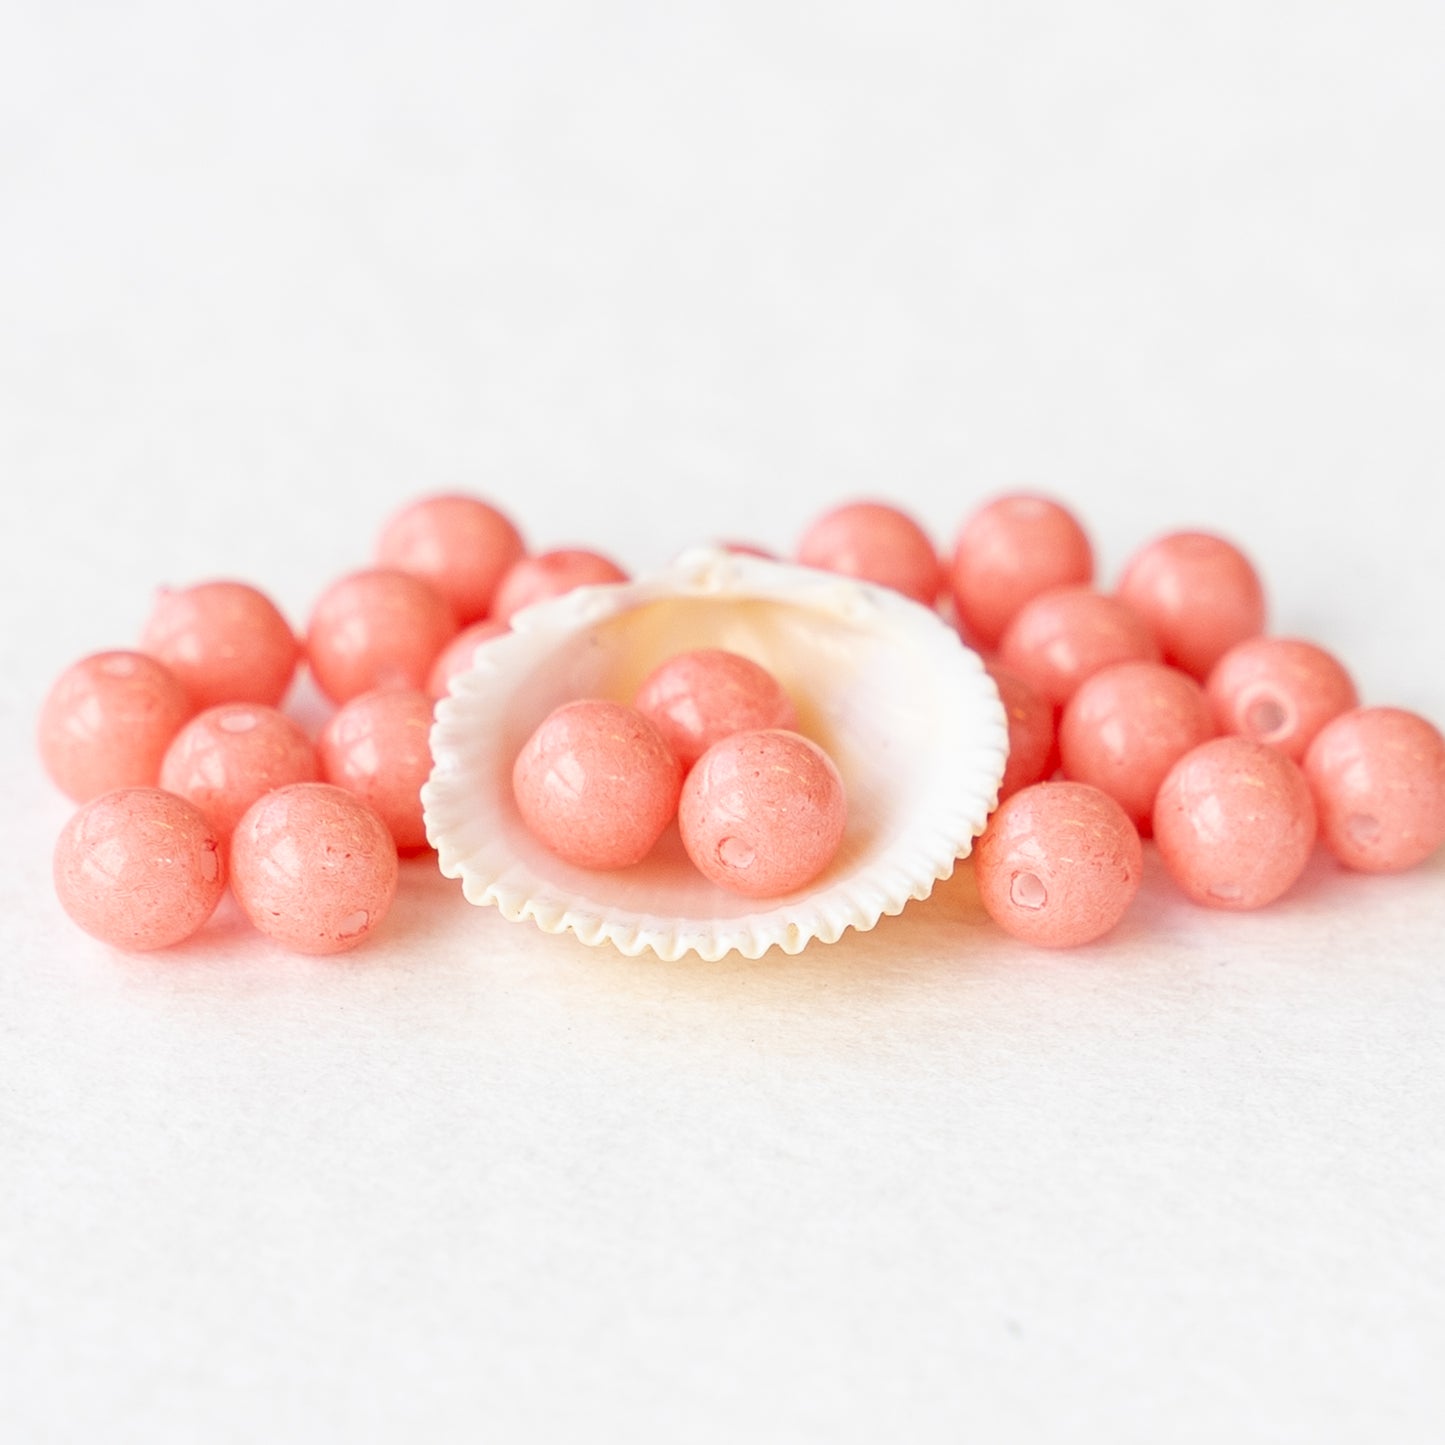 4mm Round Opaques - Pink - 100 Beads